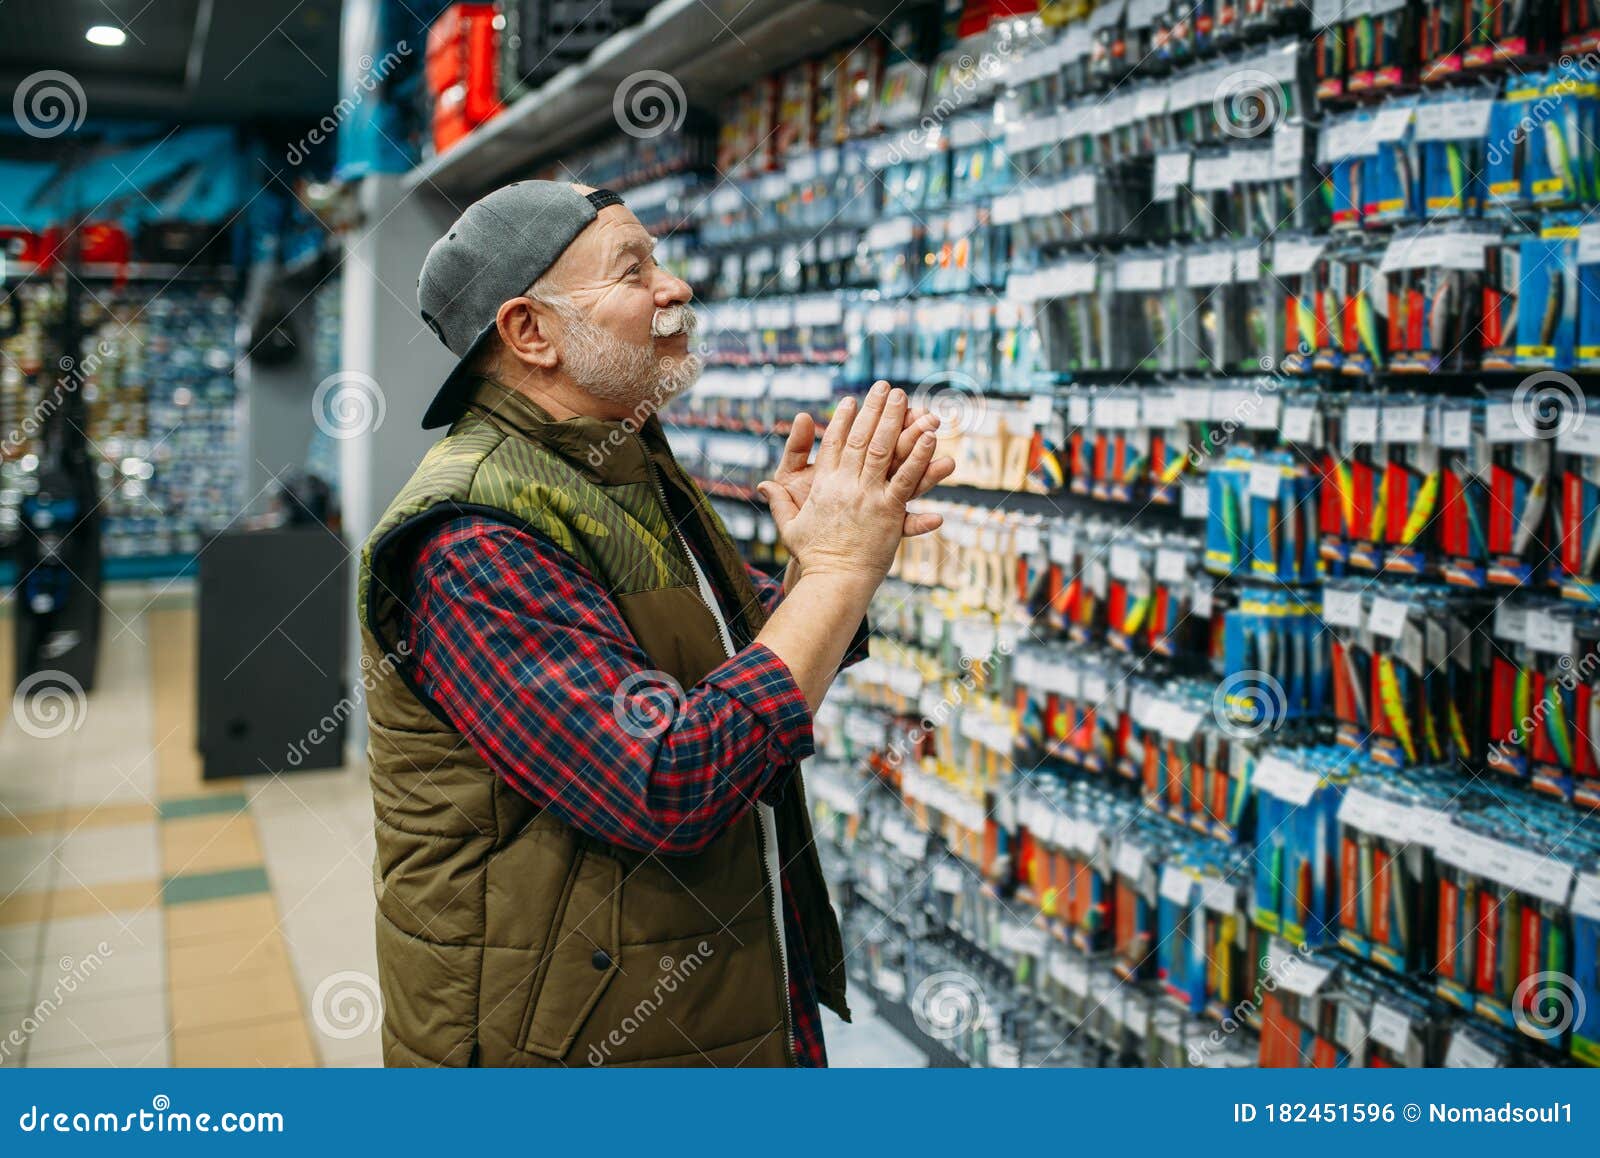 Angler Choosing Hooks and Baubles in Fishing Shop Stock Photo